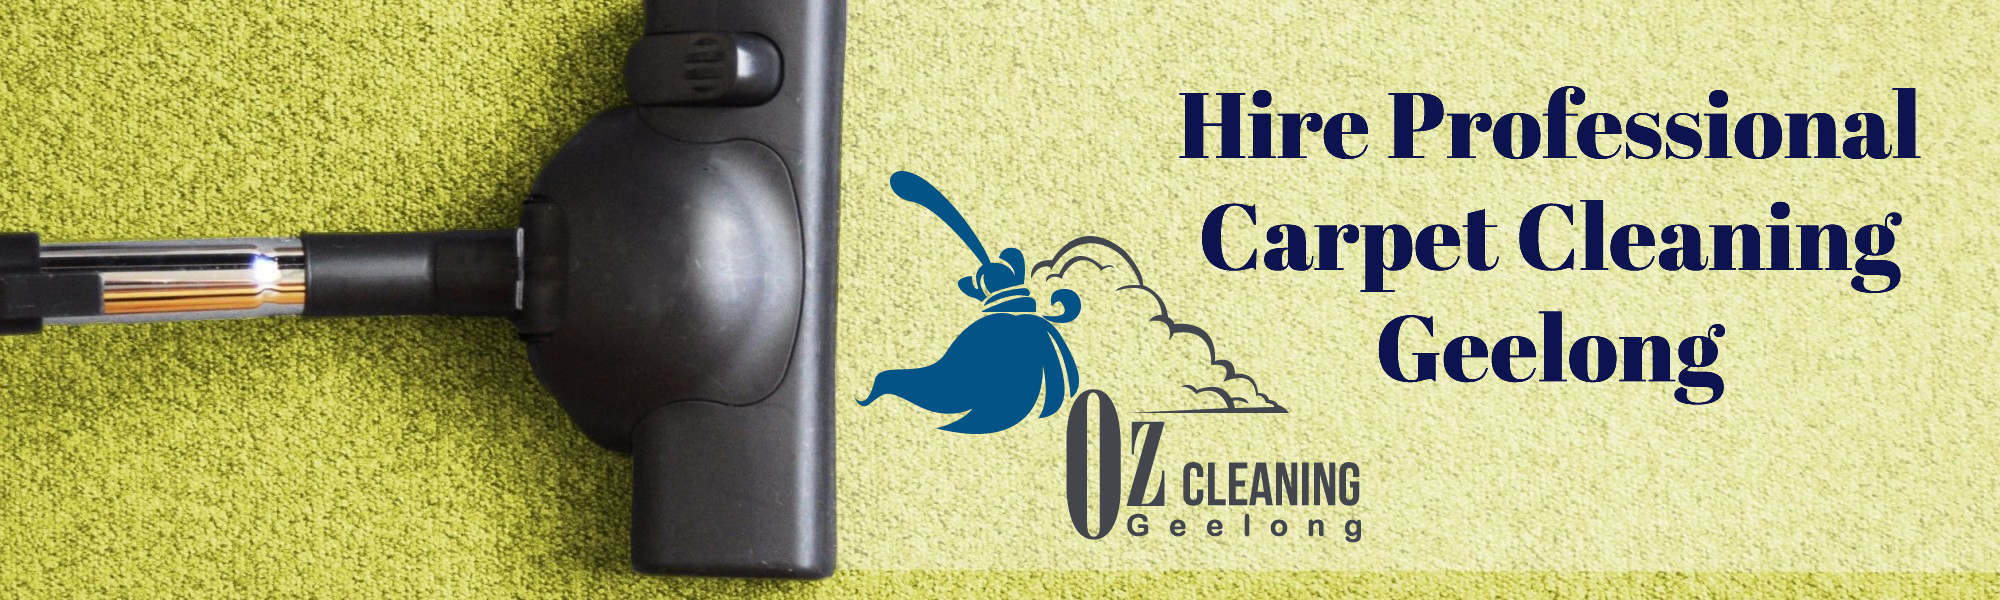 Hire Professional Carpet Cleaning Geelong